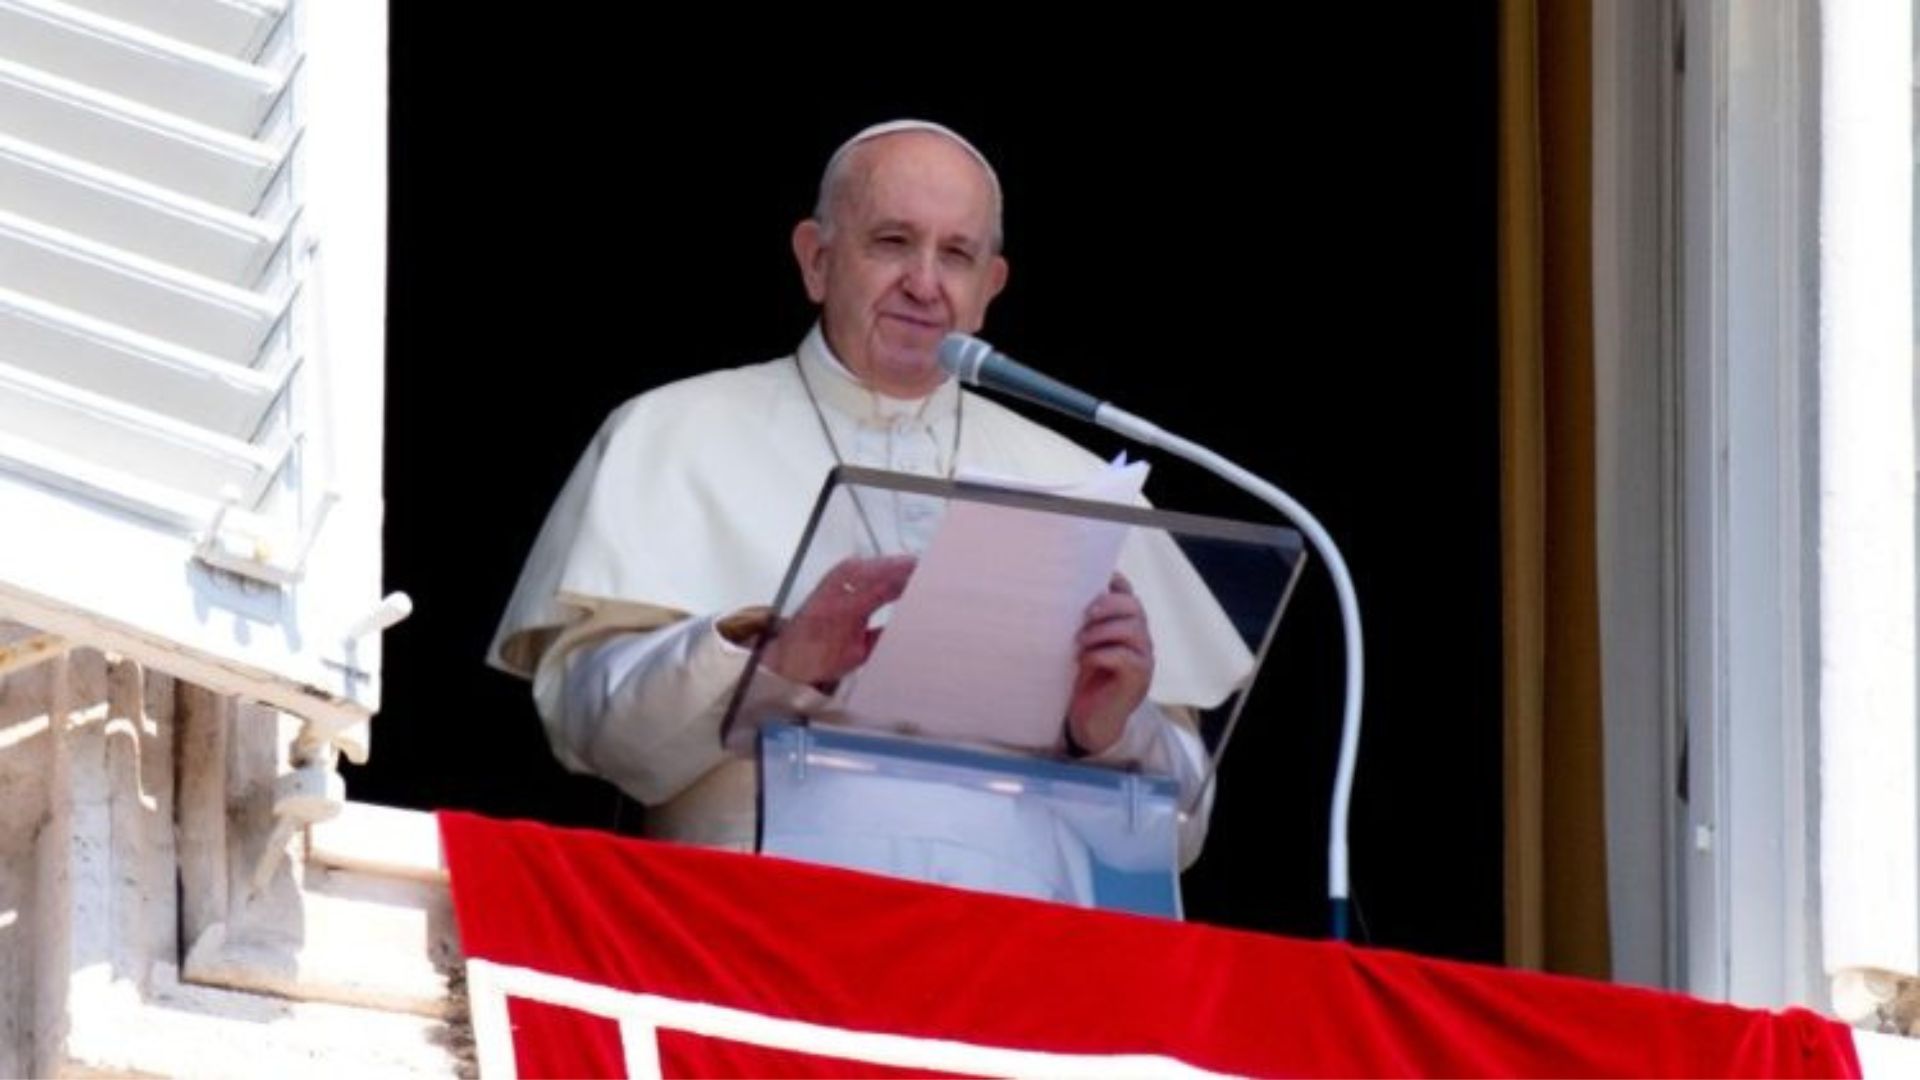 Pope Francis: "Concern and pain" for the situation in Nicaragua